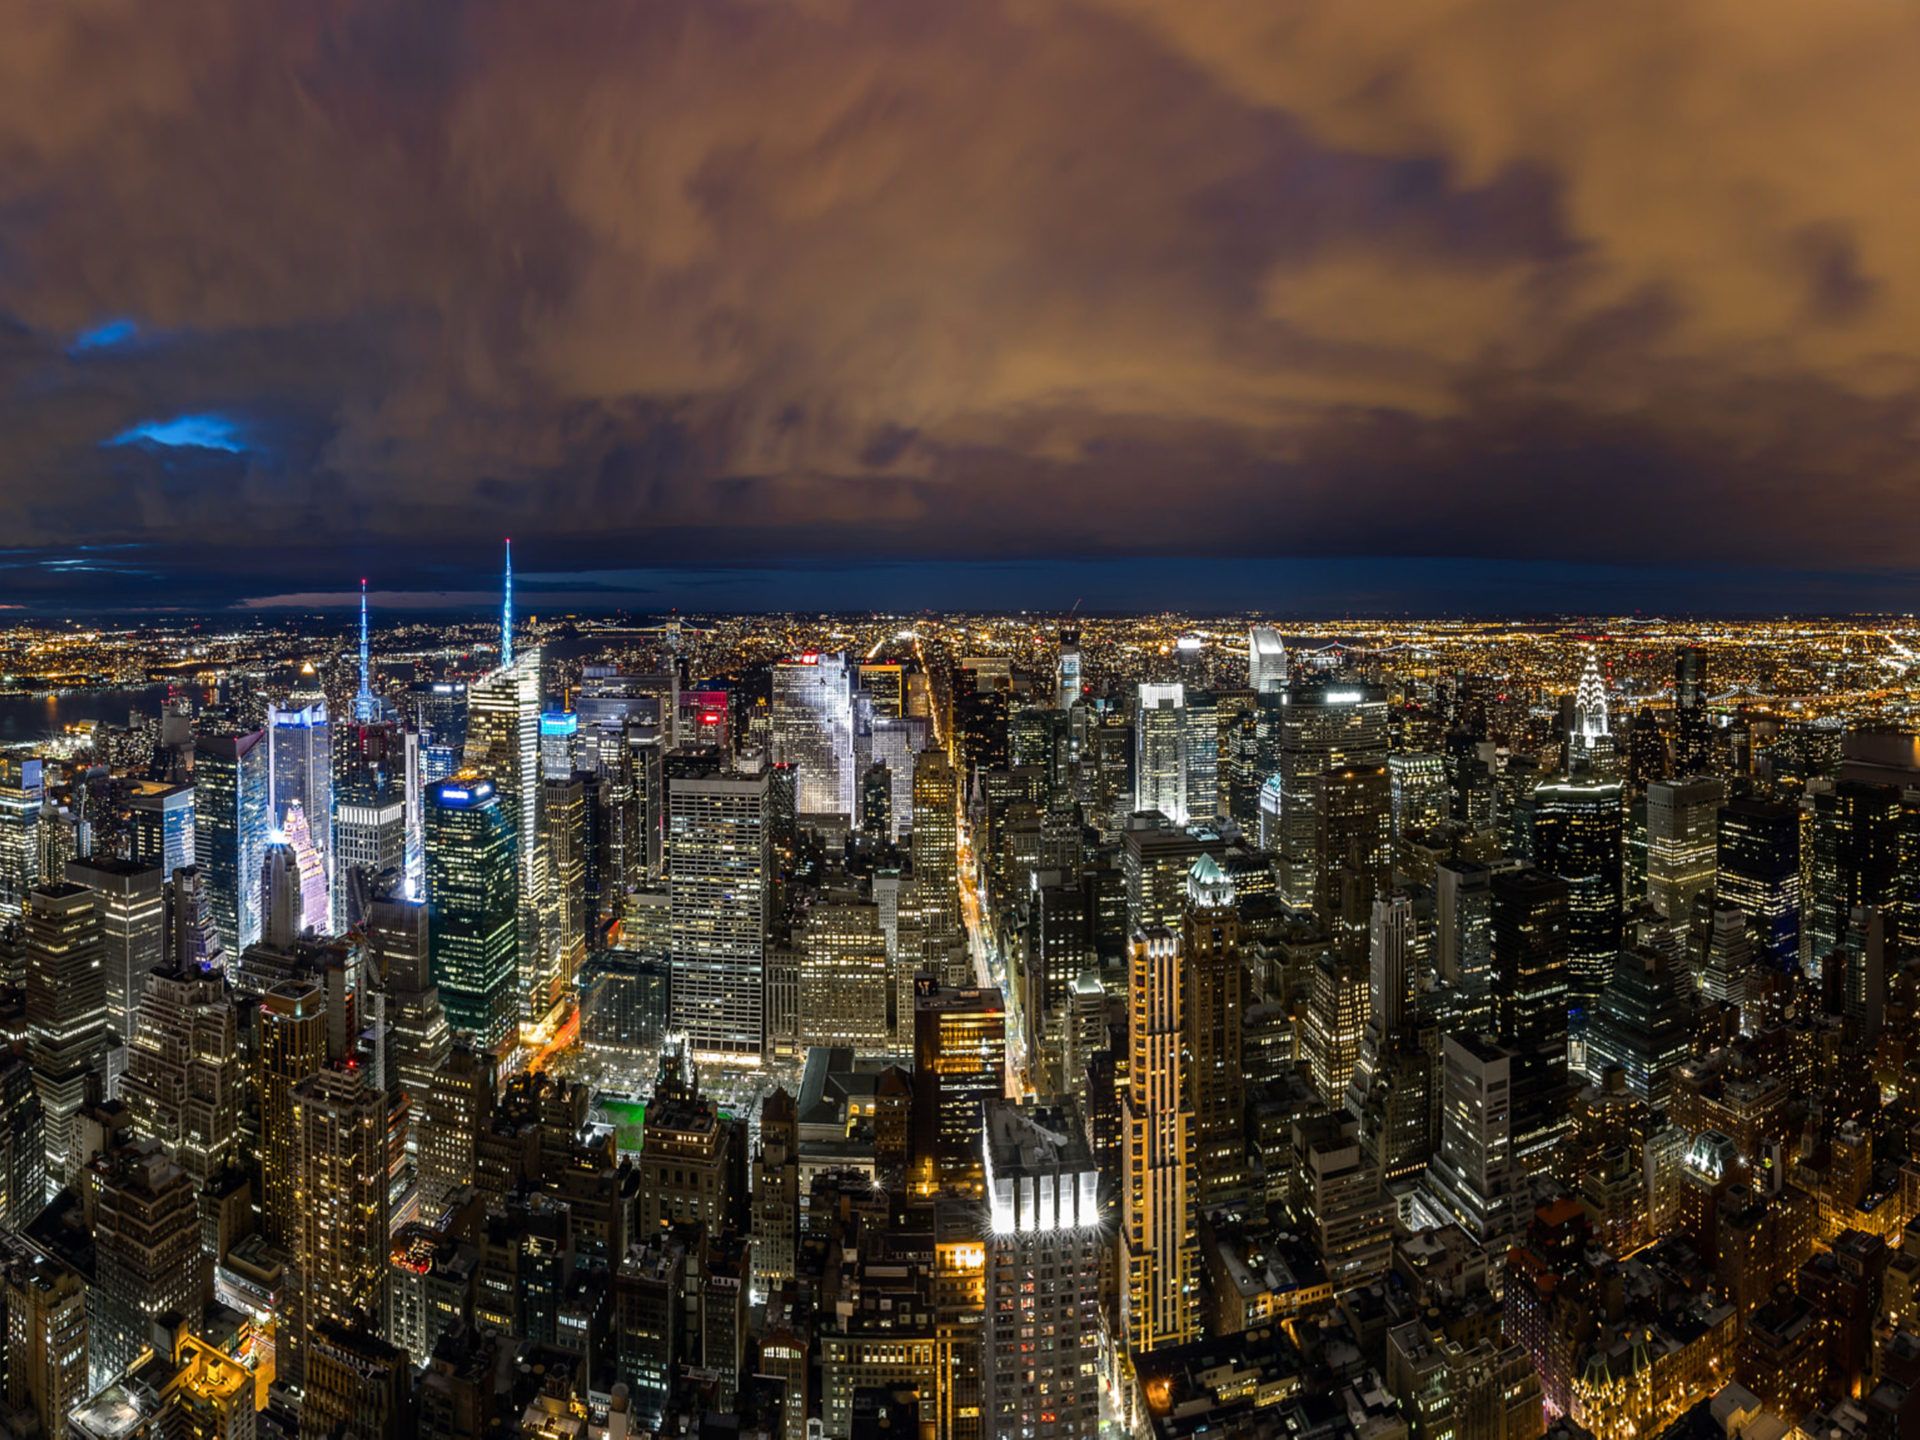 New York Cityscape At Night Aerial View Panorama United States Of America Best HD Desktop Wallpaper For Tablets And Mobile Phones, Wallpaper13.com